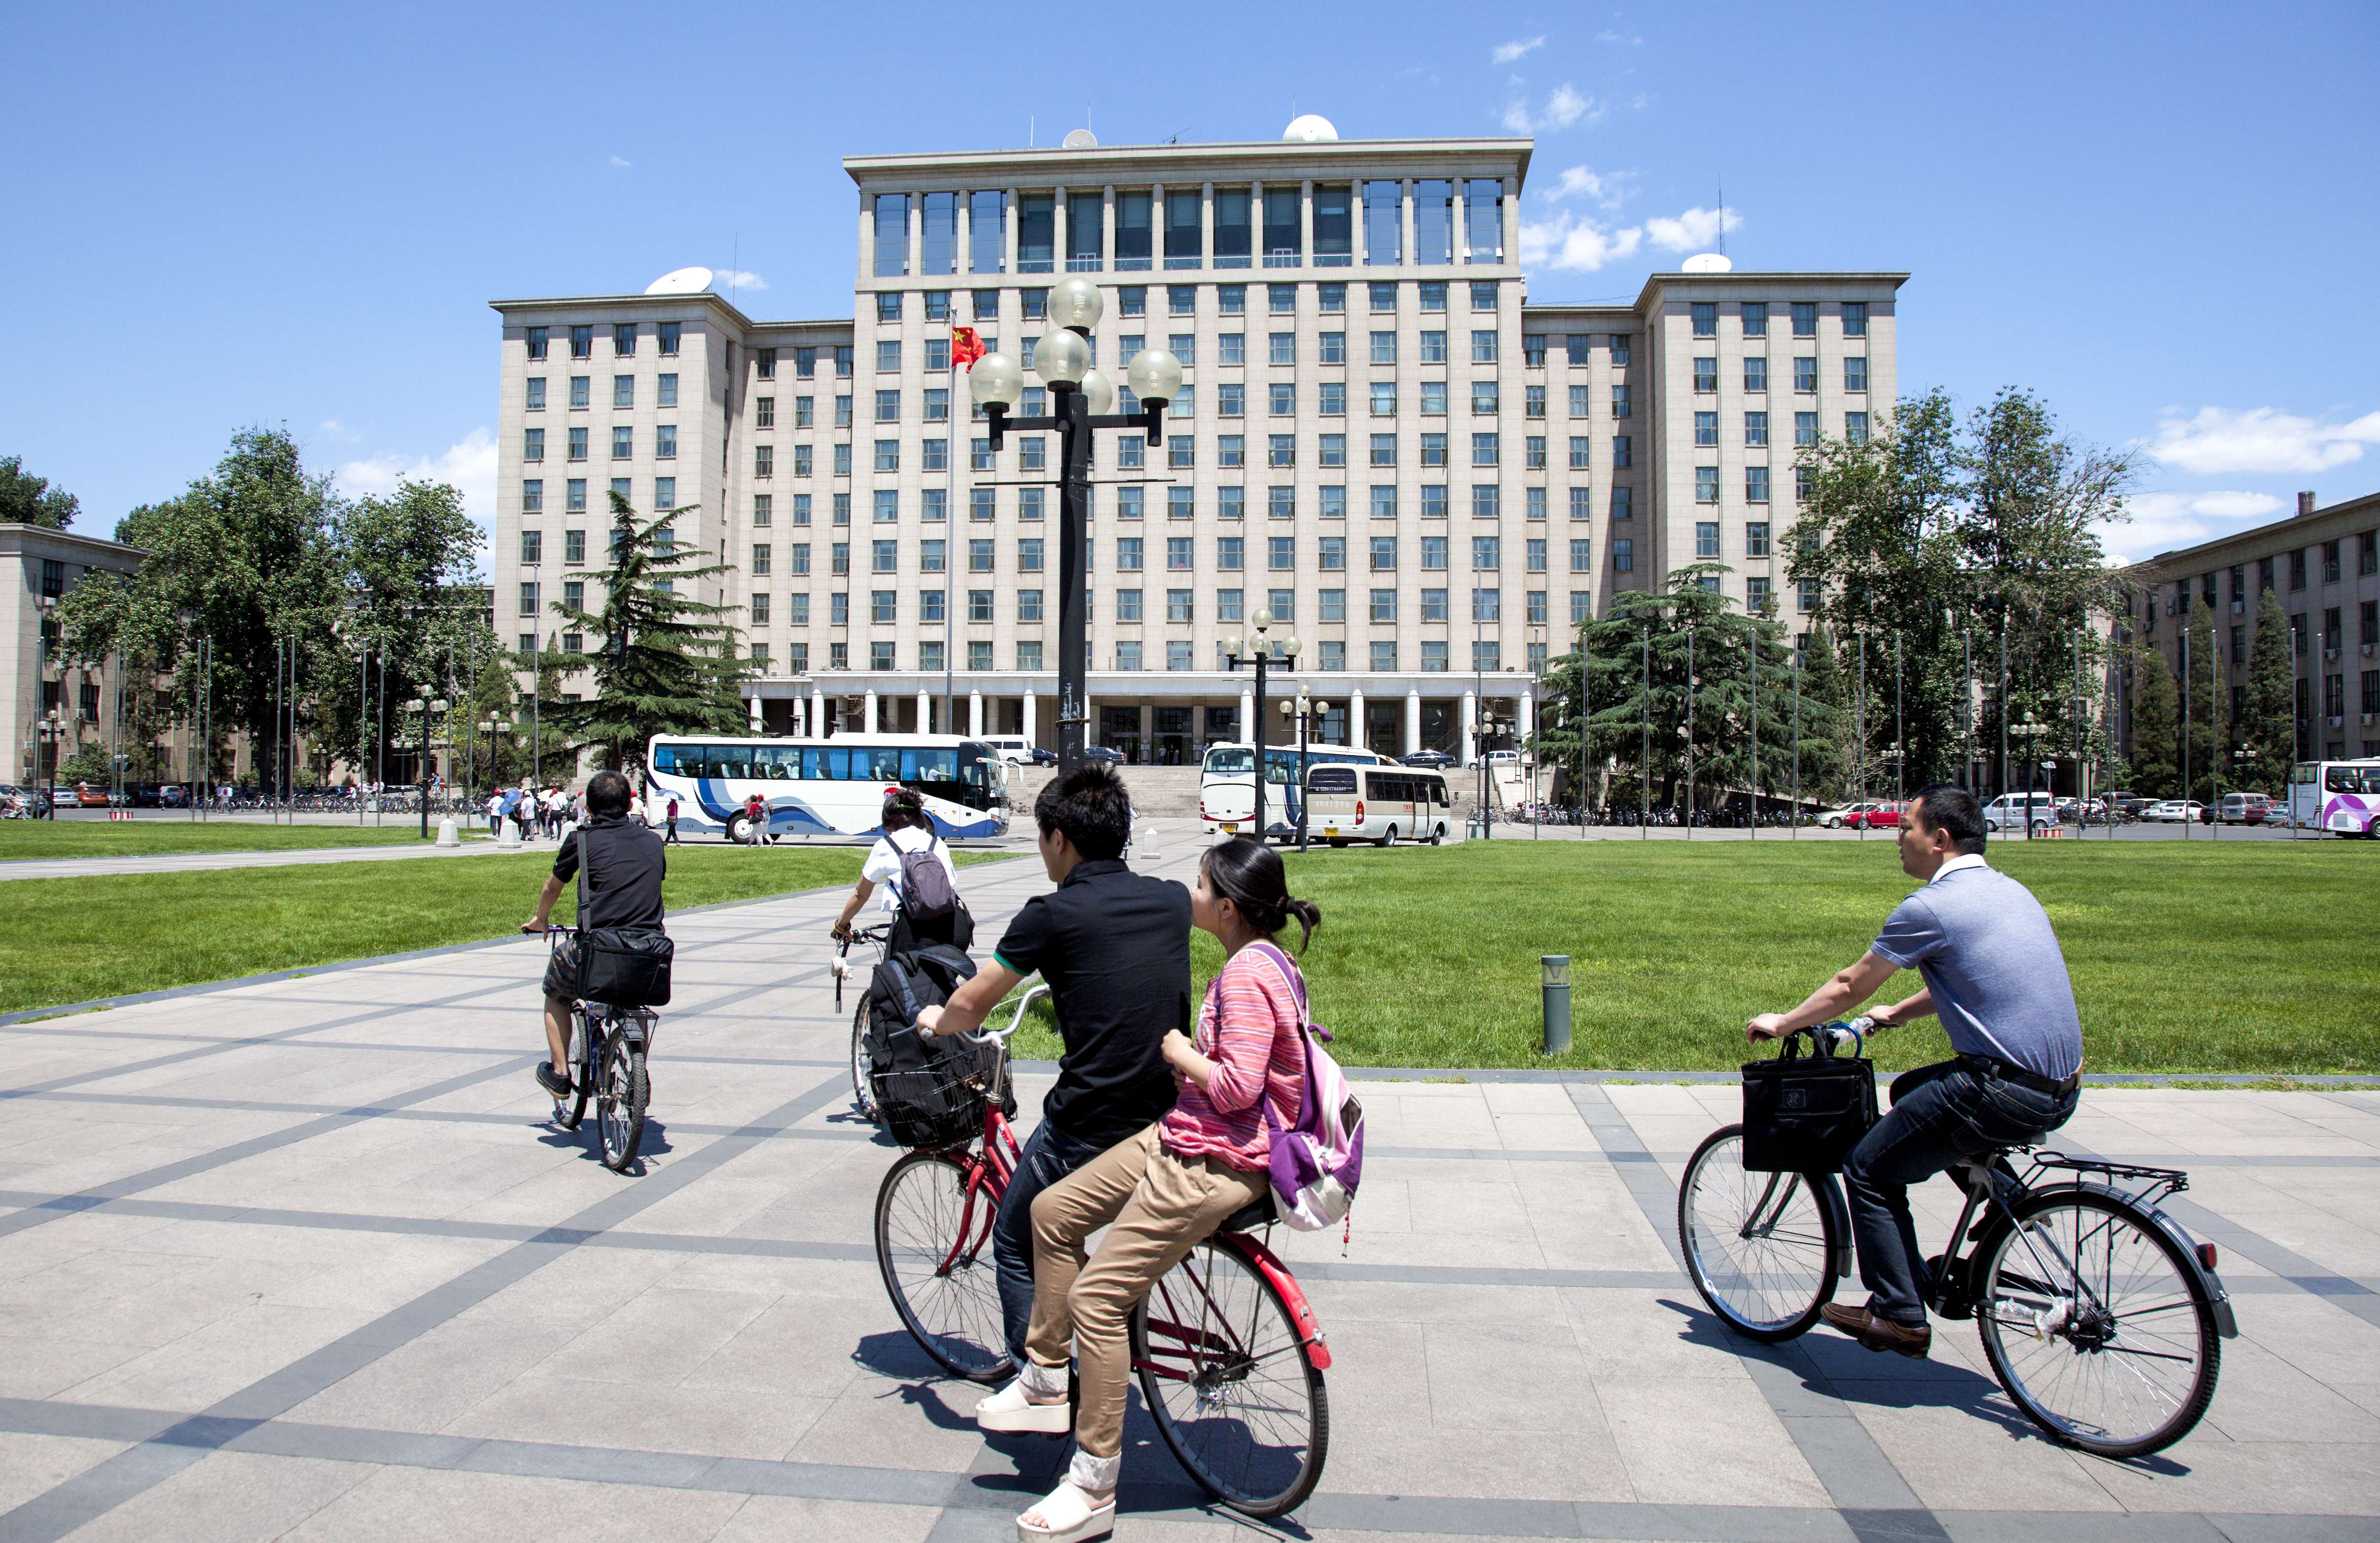 Students cycle past the central main building on campus at Tsinghua University in Beijing. Photo: SCMP Pictures